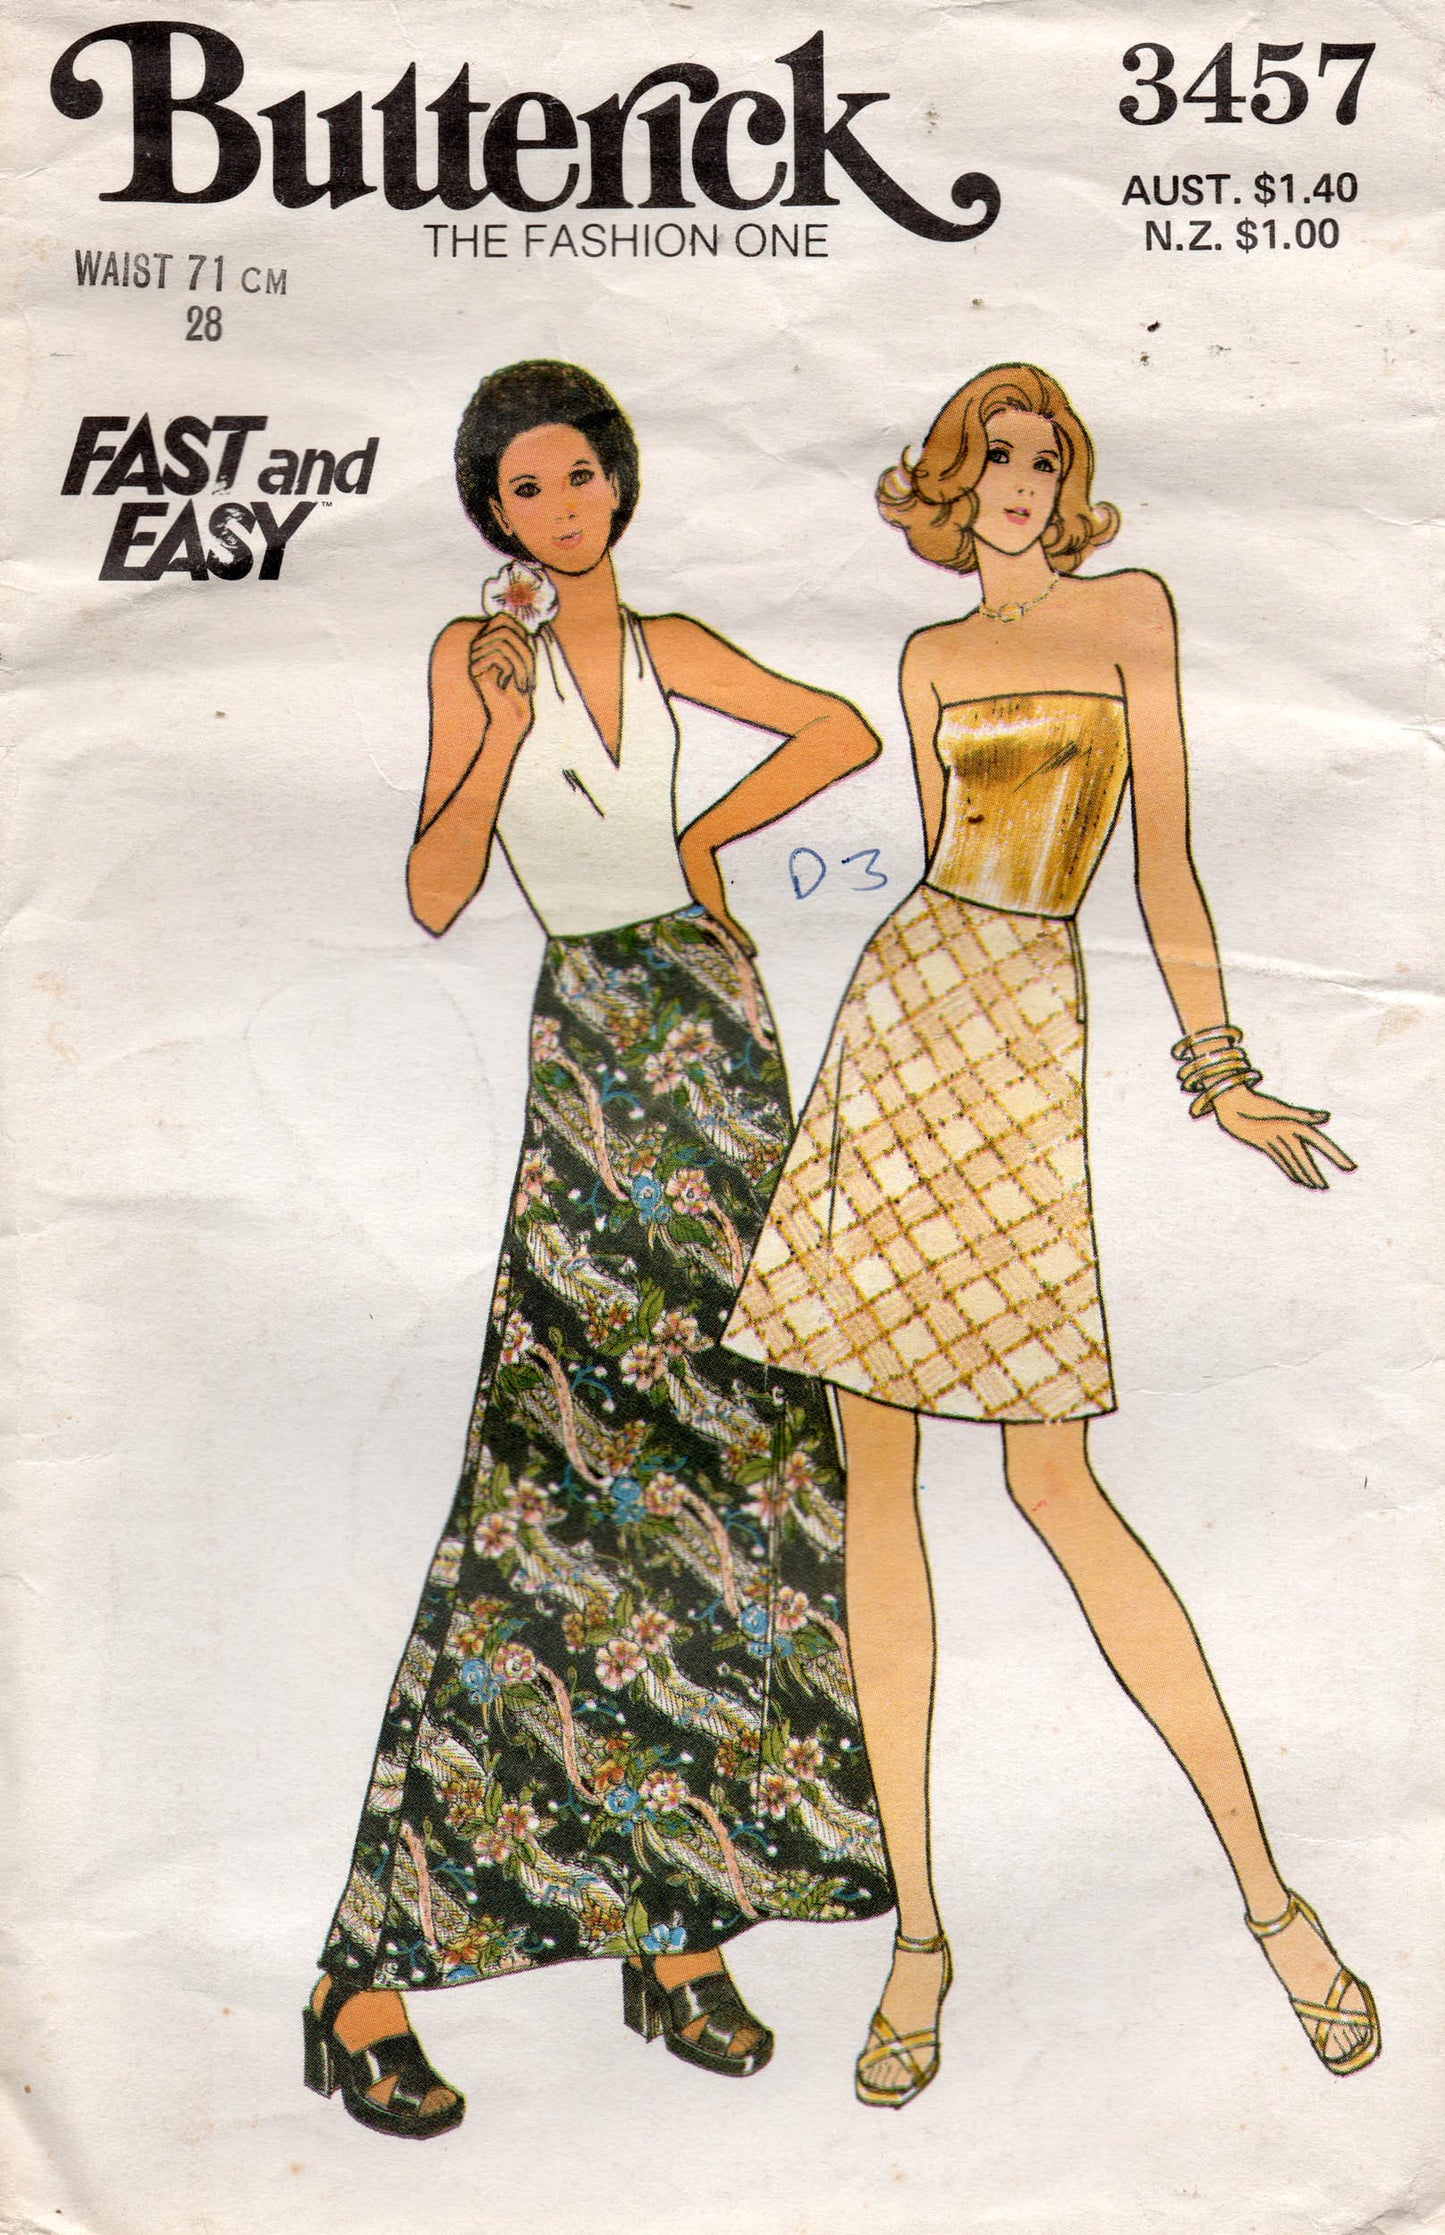 Butterick 3457 Womens EASY Bias Cut Maxi or Mini Skirts 1970s Vintage Sewing Pattern Size 10 or 14